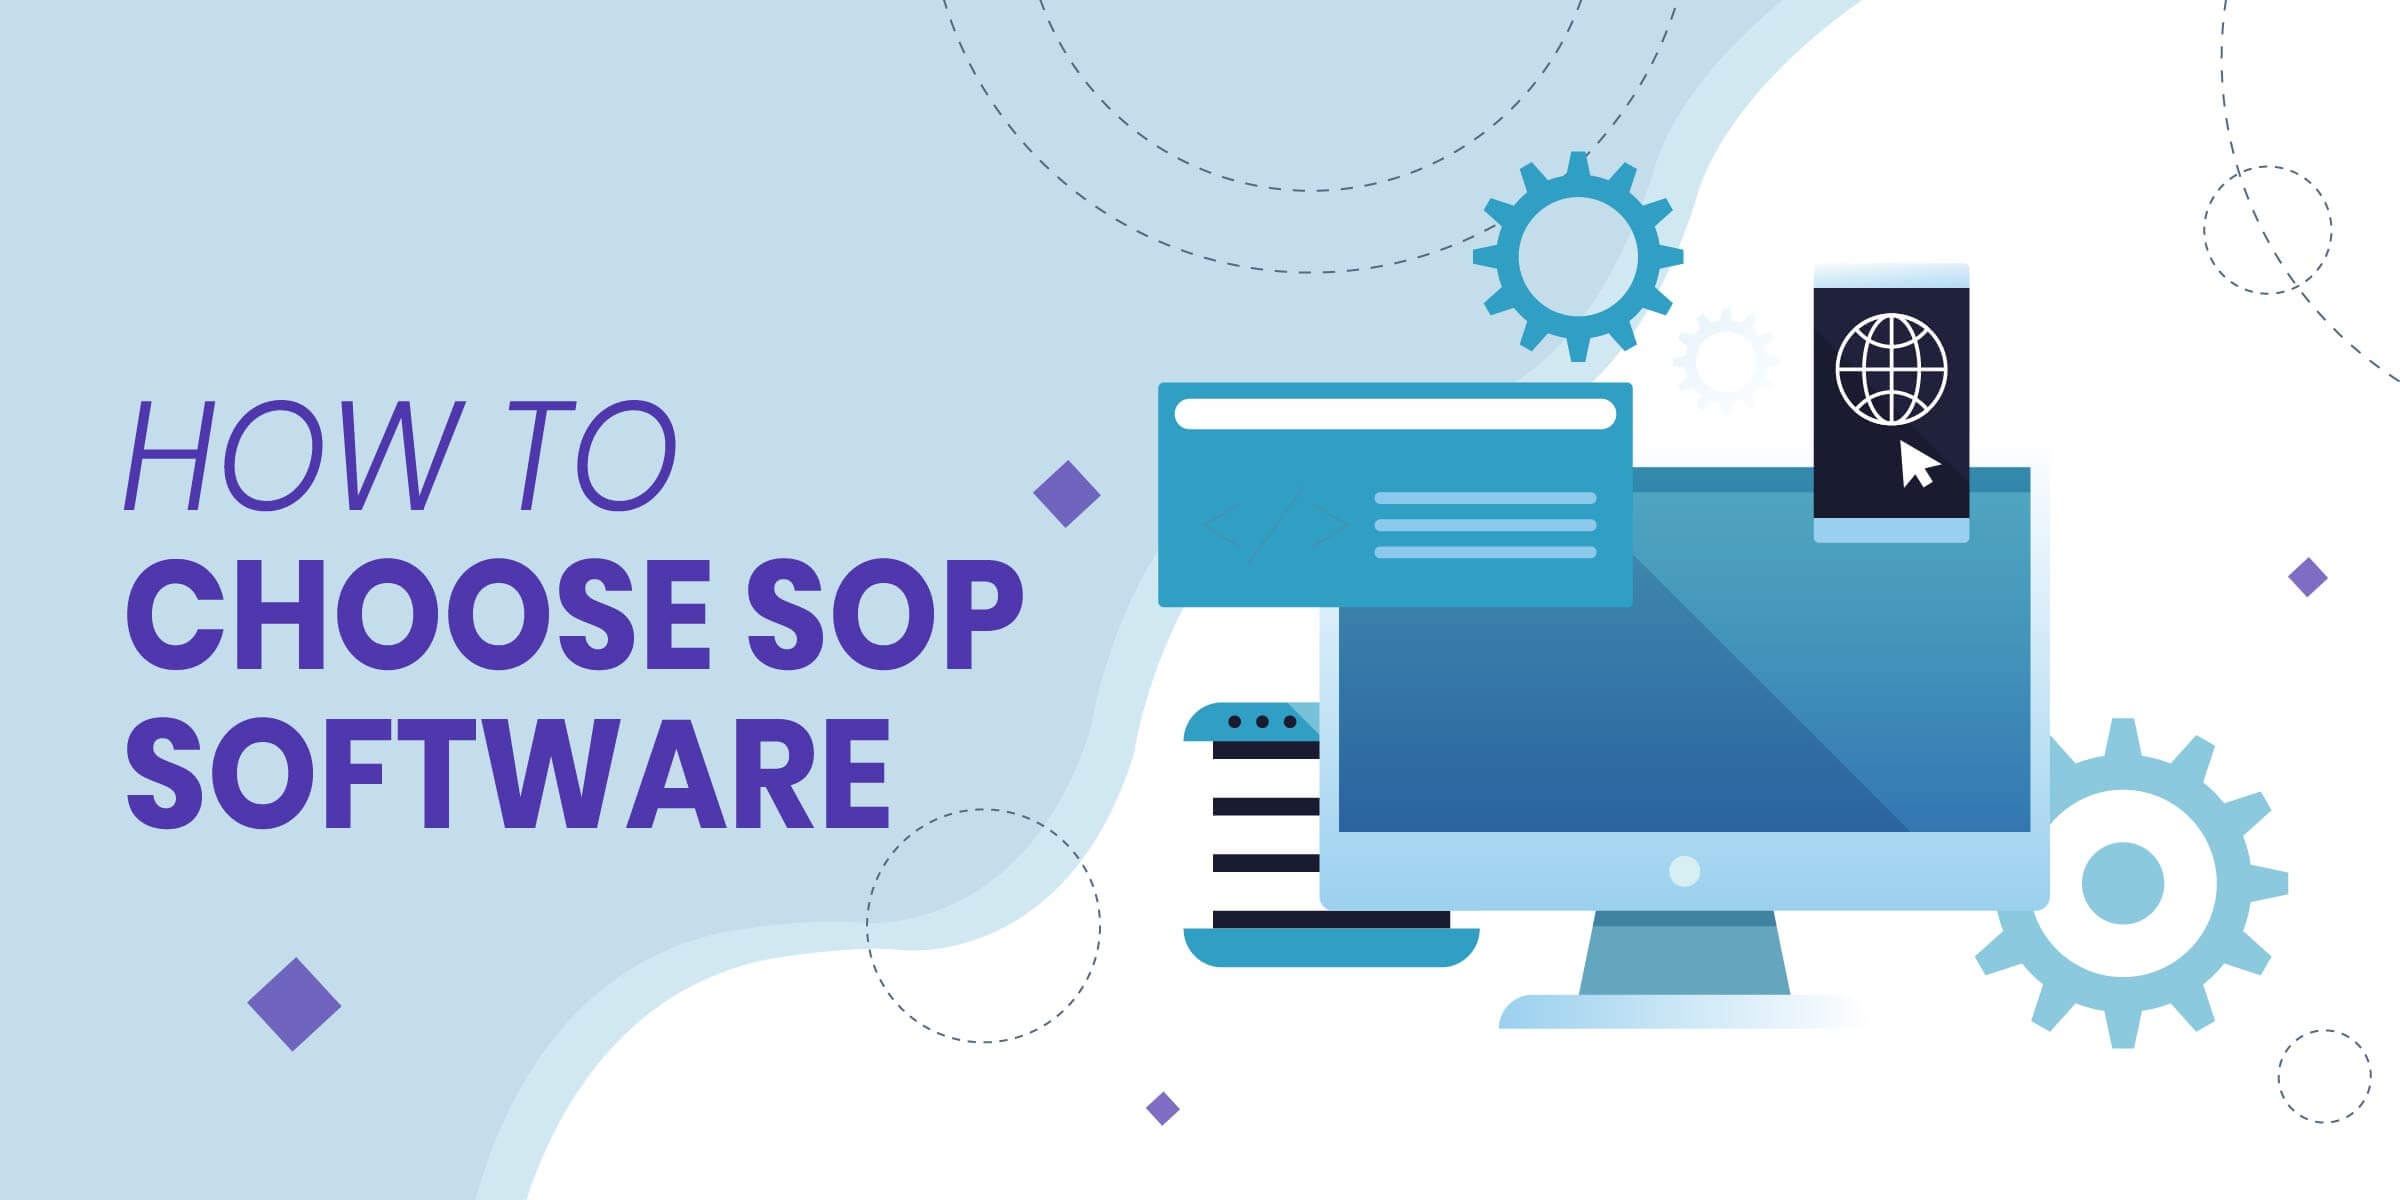 How to Choose SOP Software